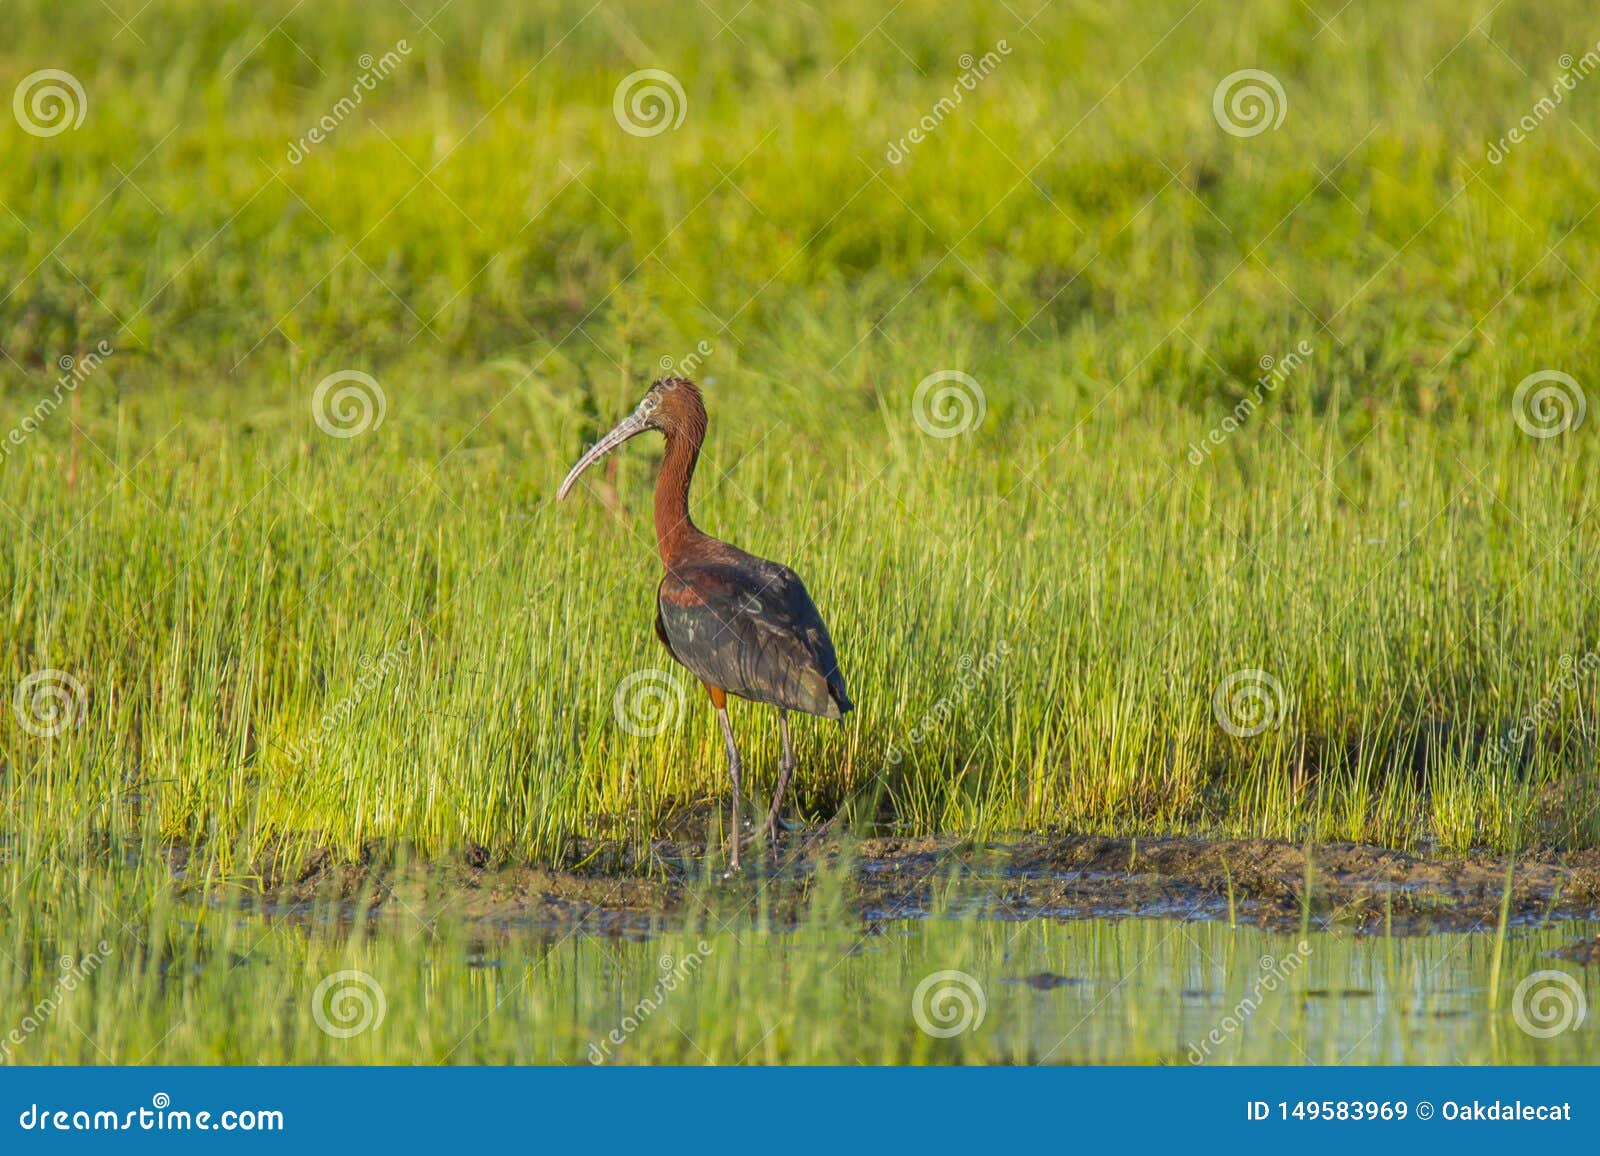 adult glossy ibis standing on edge of mudflat